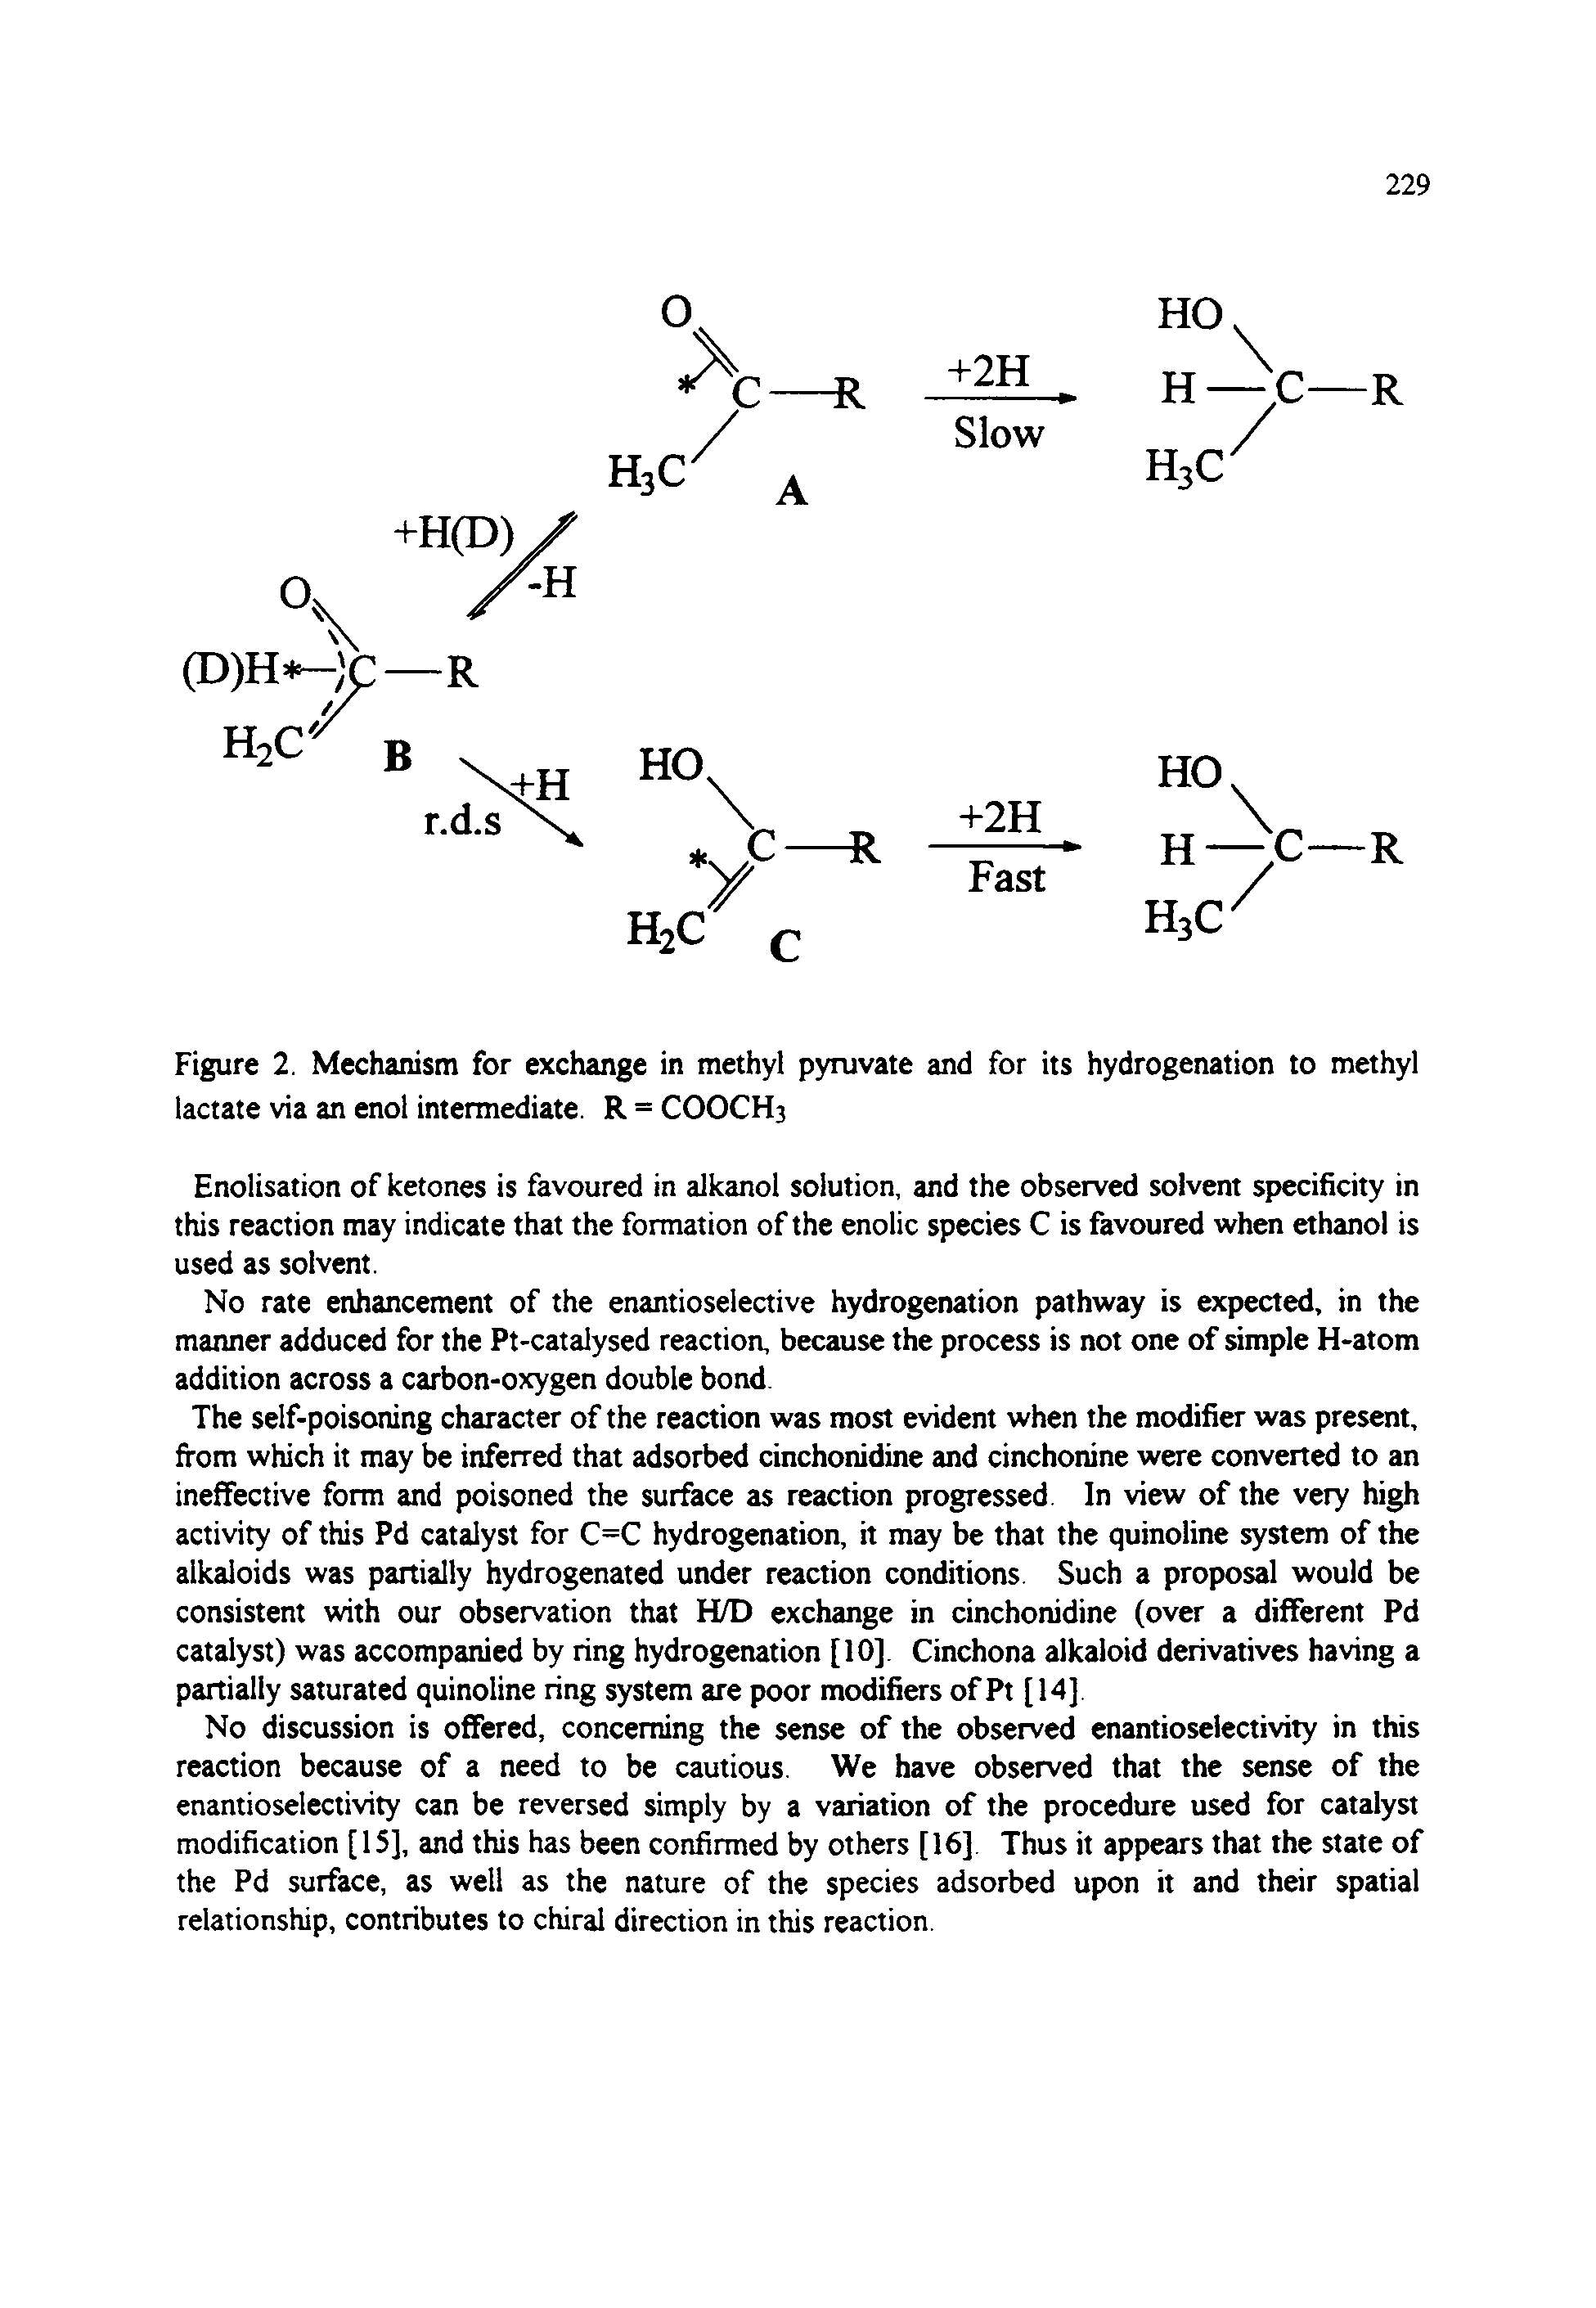 Figure 2. Mechanism for exchange in methyl pyruvate and for its hydrogenation to methyl lactate via an enol intermediate. R = COOCH3...